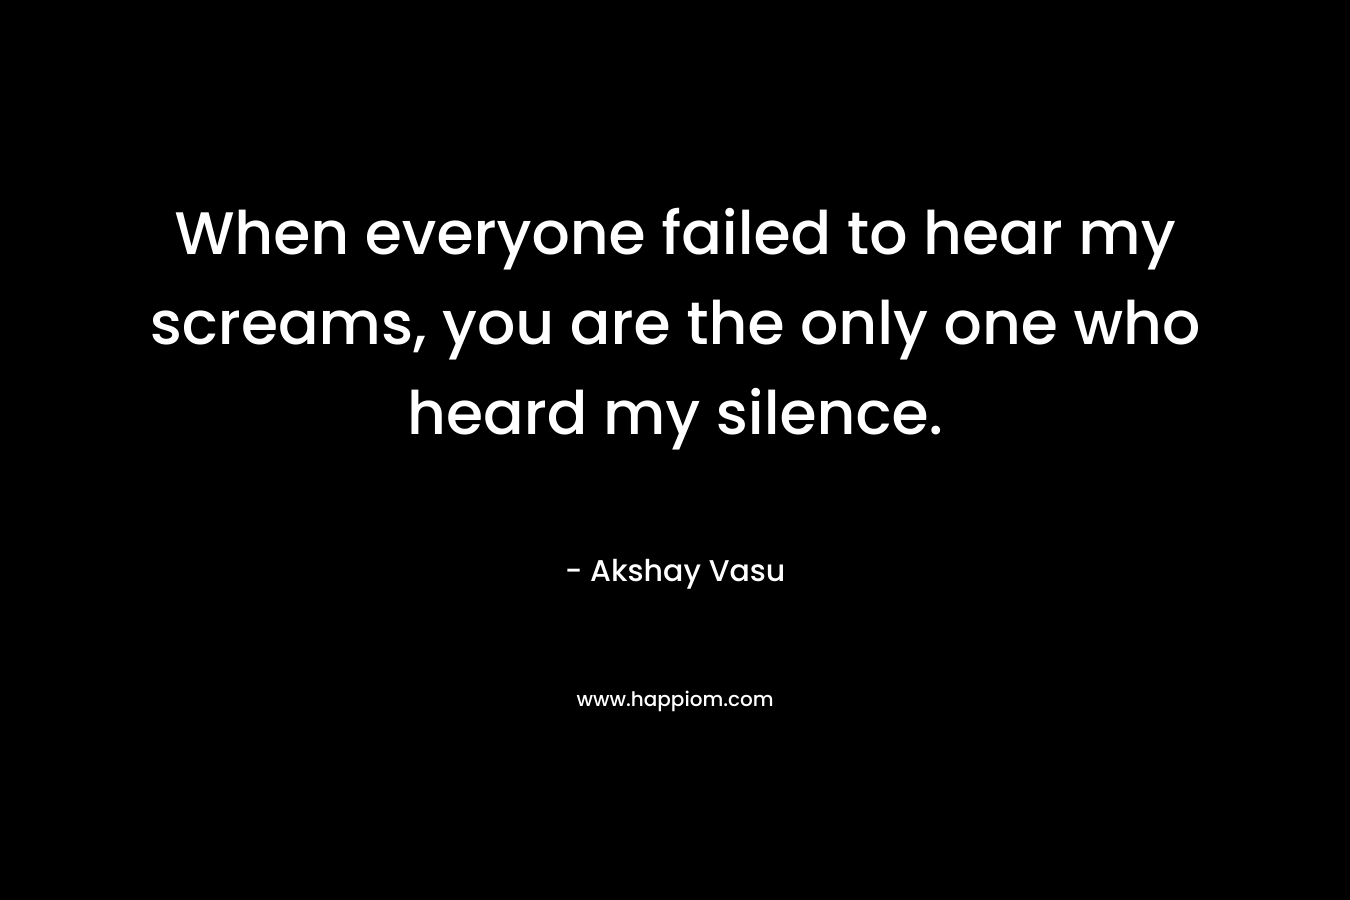 When everyone failed to hear my screams, you are the only one who heard my silence.